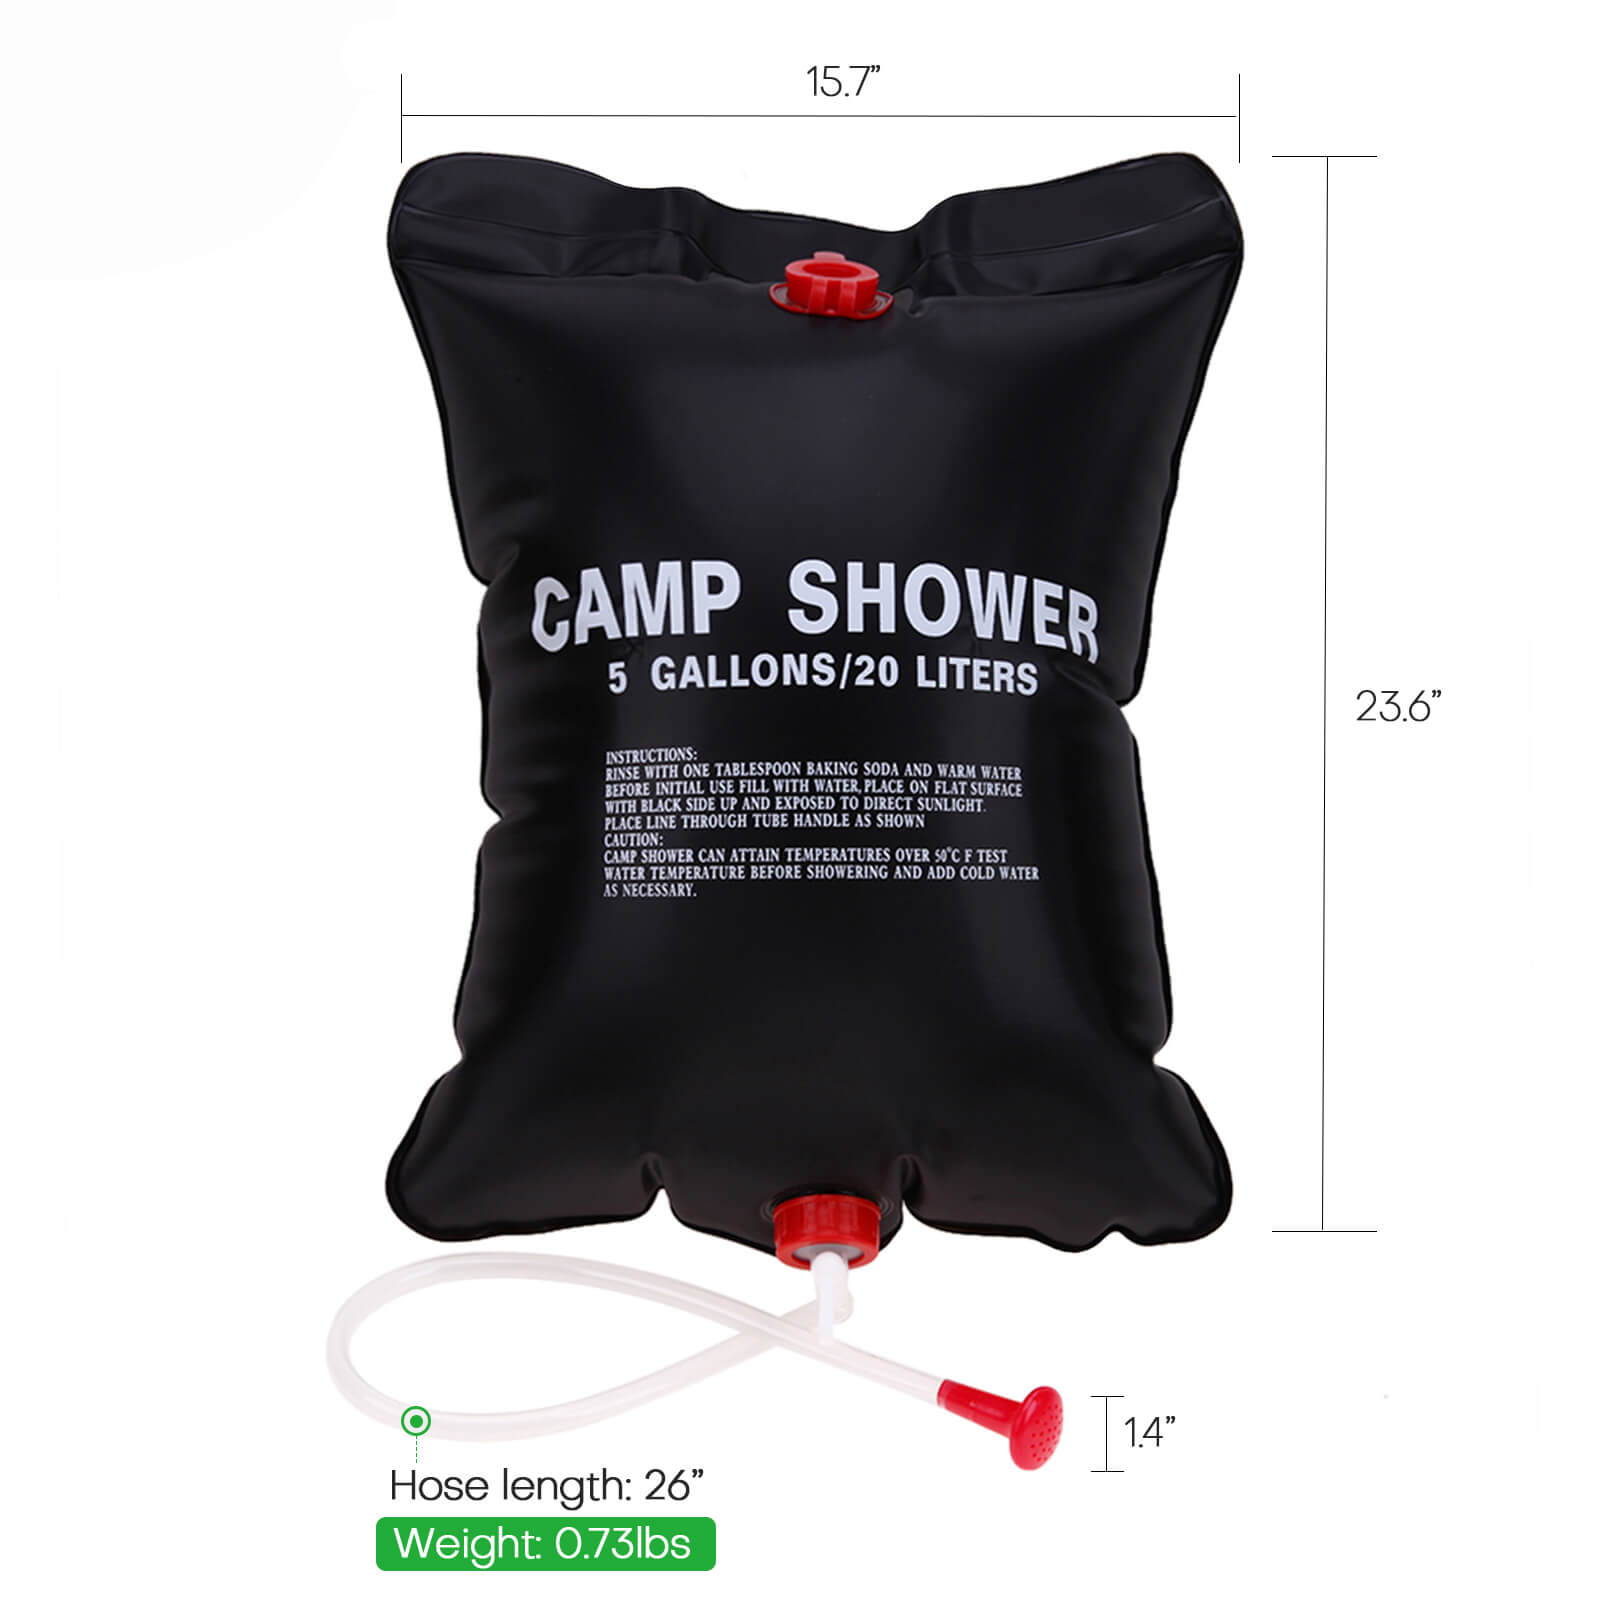 The size of the solar camping shower bag